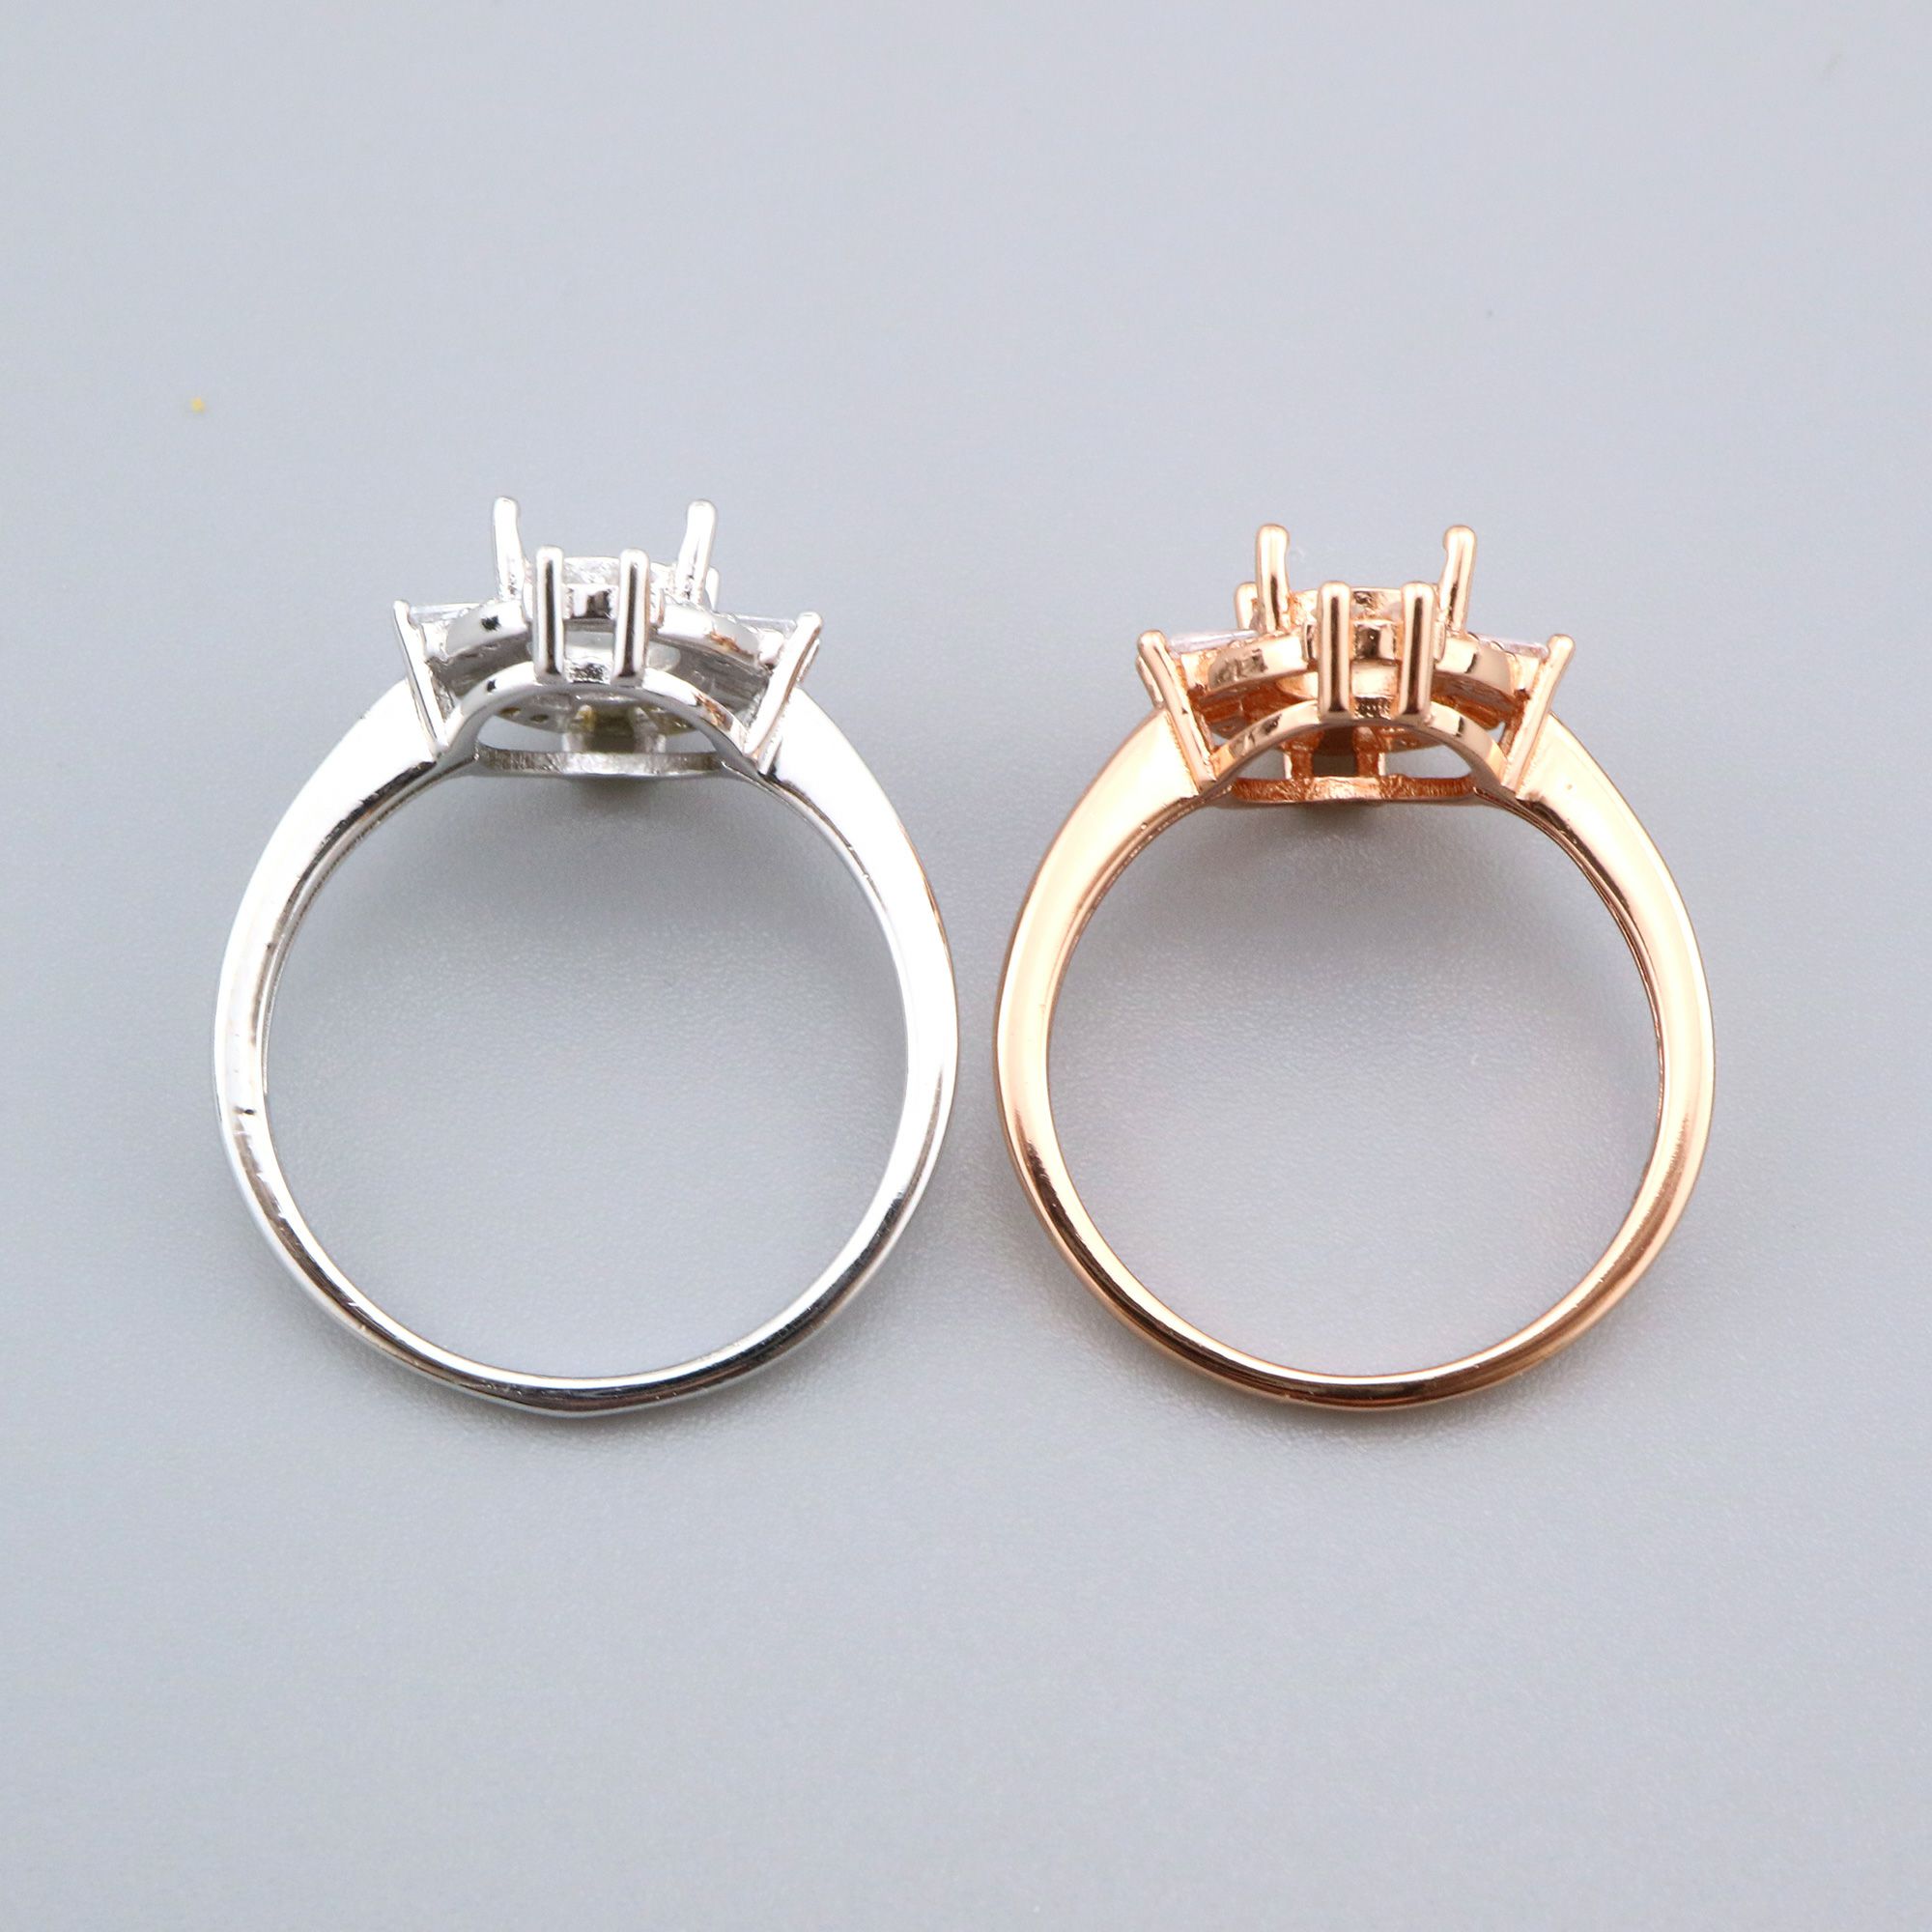 6x8MM Oval Prong Ring Settings Solid 925 Sterling Silver Rose Gold Plated Vintage Style Set Size DIY Ring Bezel for Gemstone Supplies 1224079 - Click Image to Close